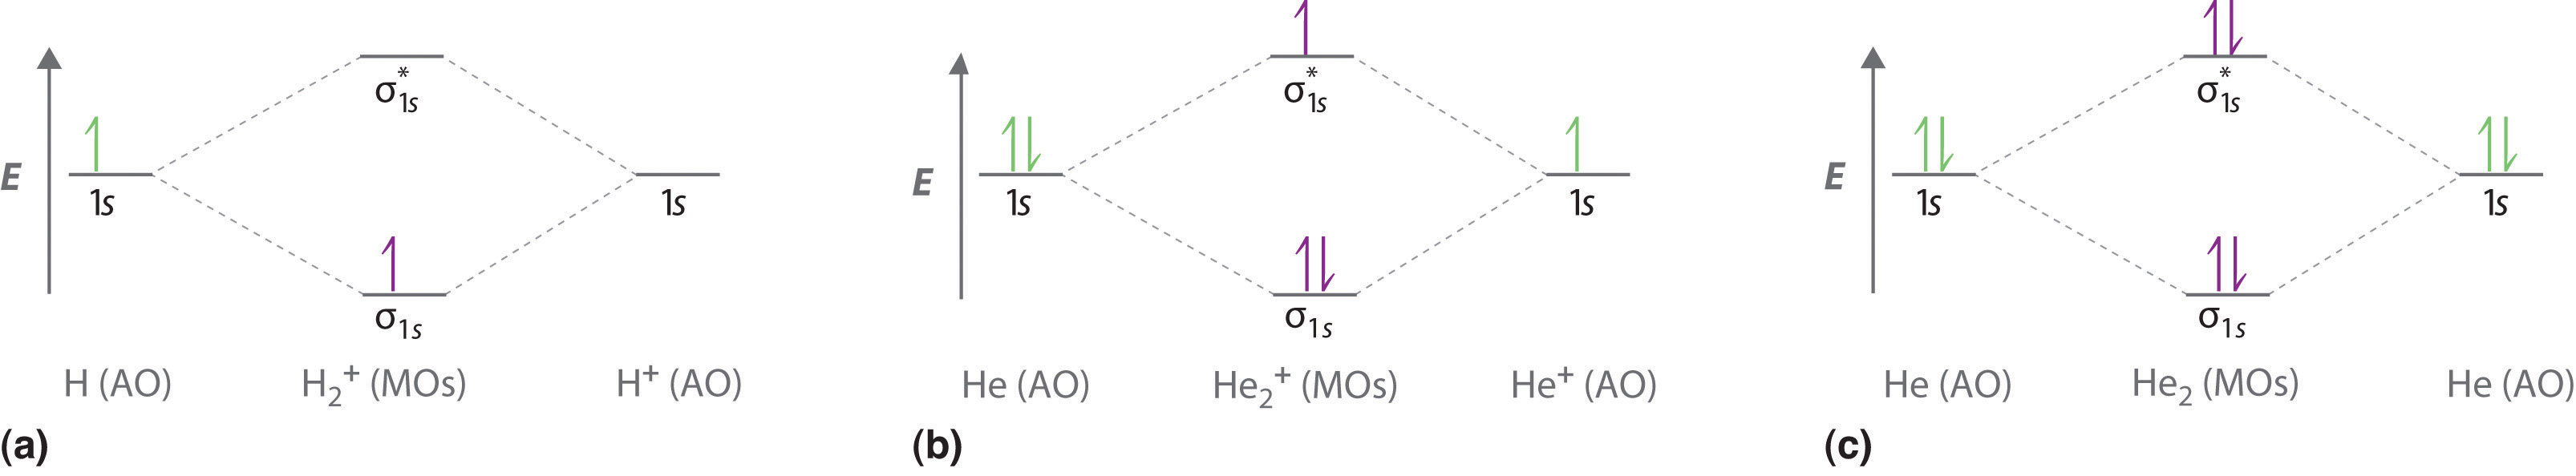 construct the molecular orbital diagram for h2 and then identify the bond order.